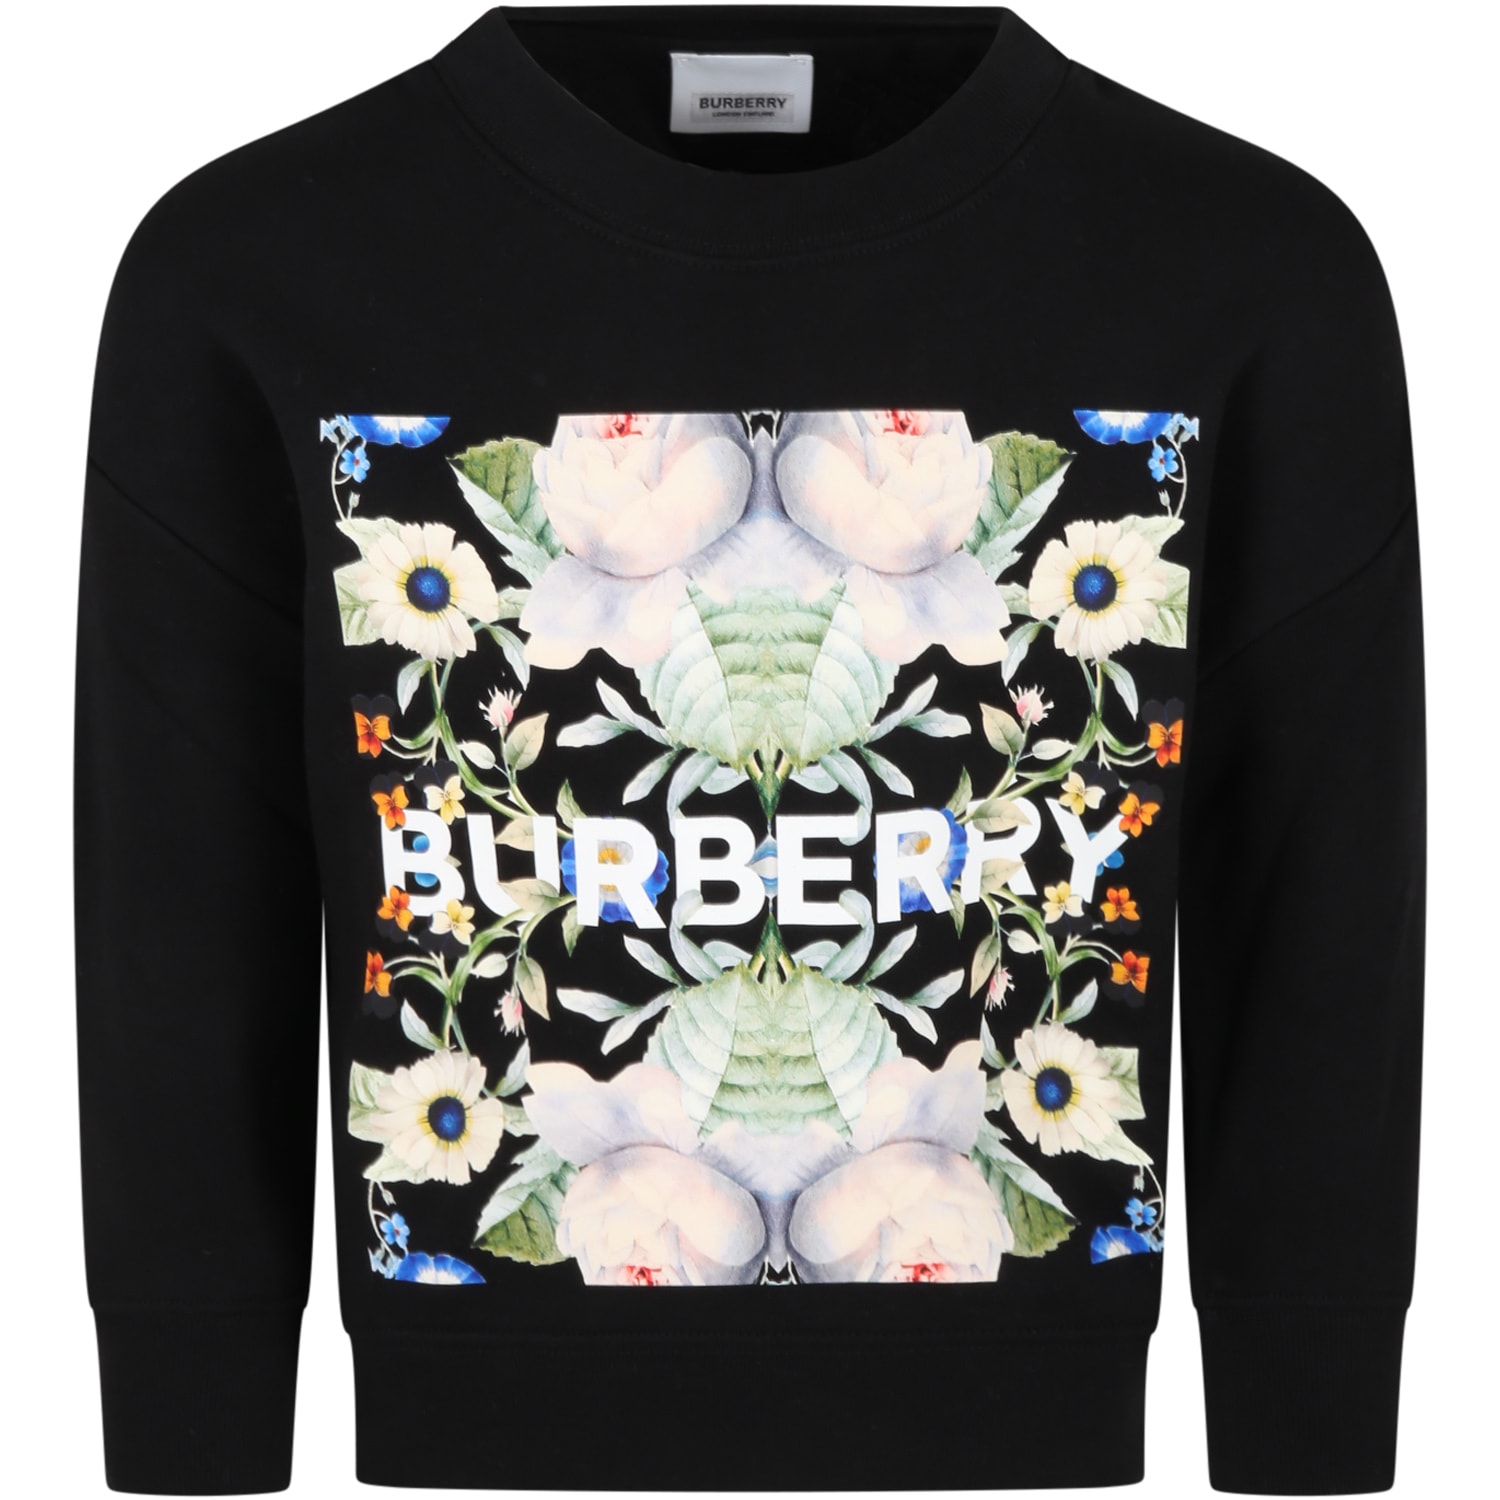 Burberry Black Sweatshirt For Girl With Flowers